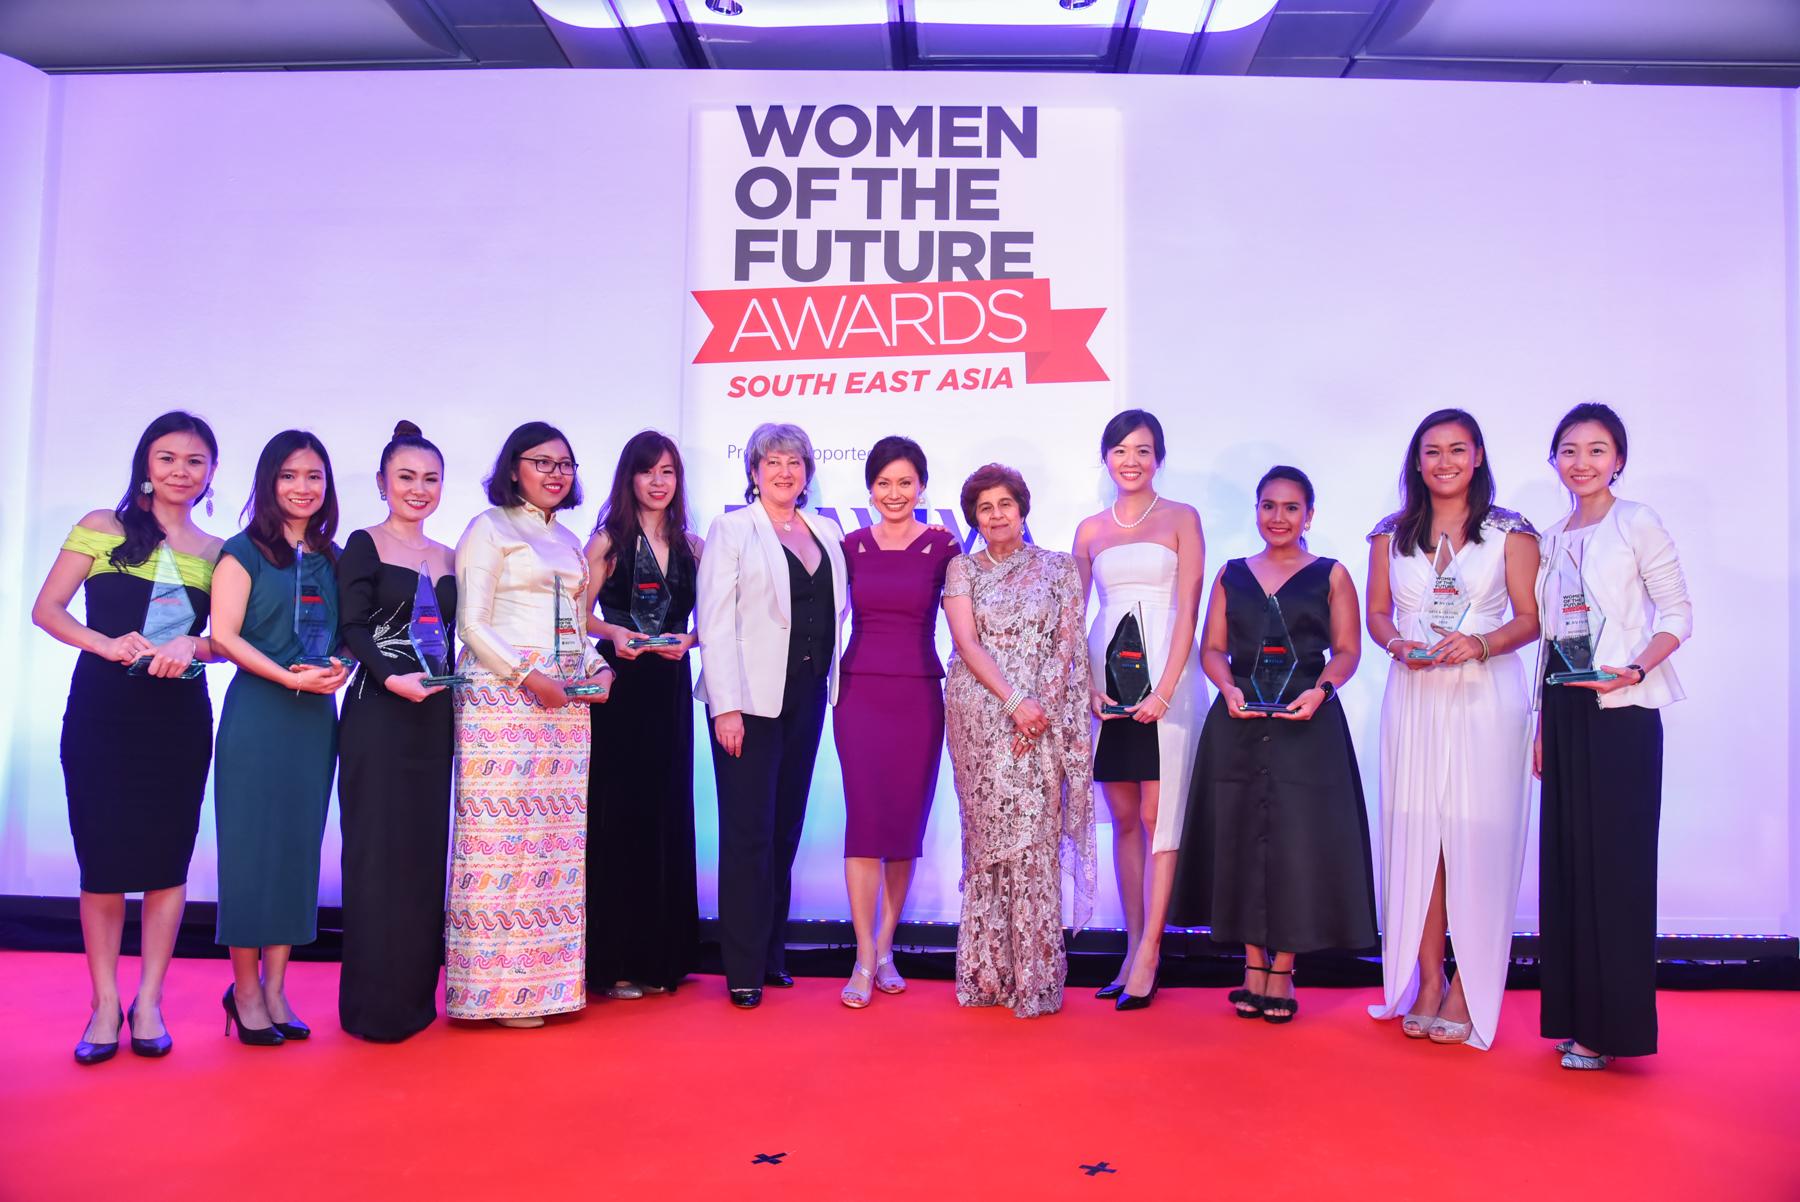 10 Filipina finalists named at the Women of the Future Awards Southeast Asia